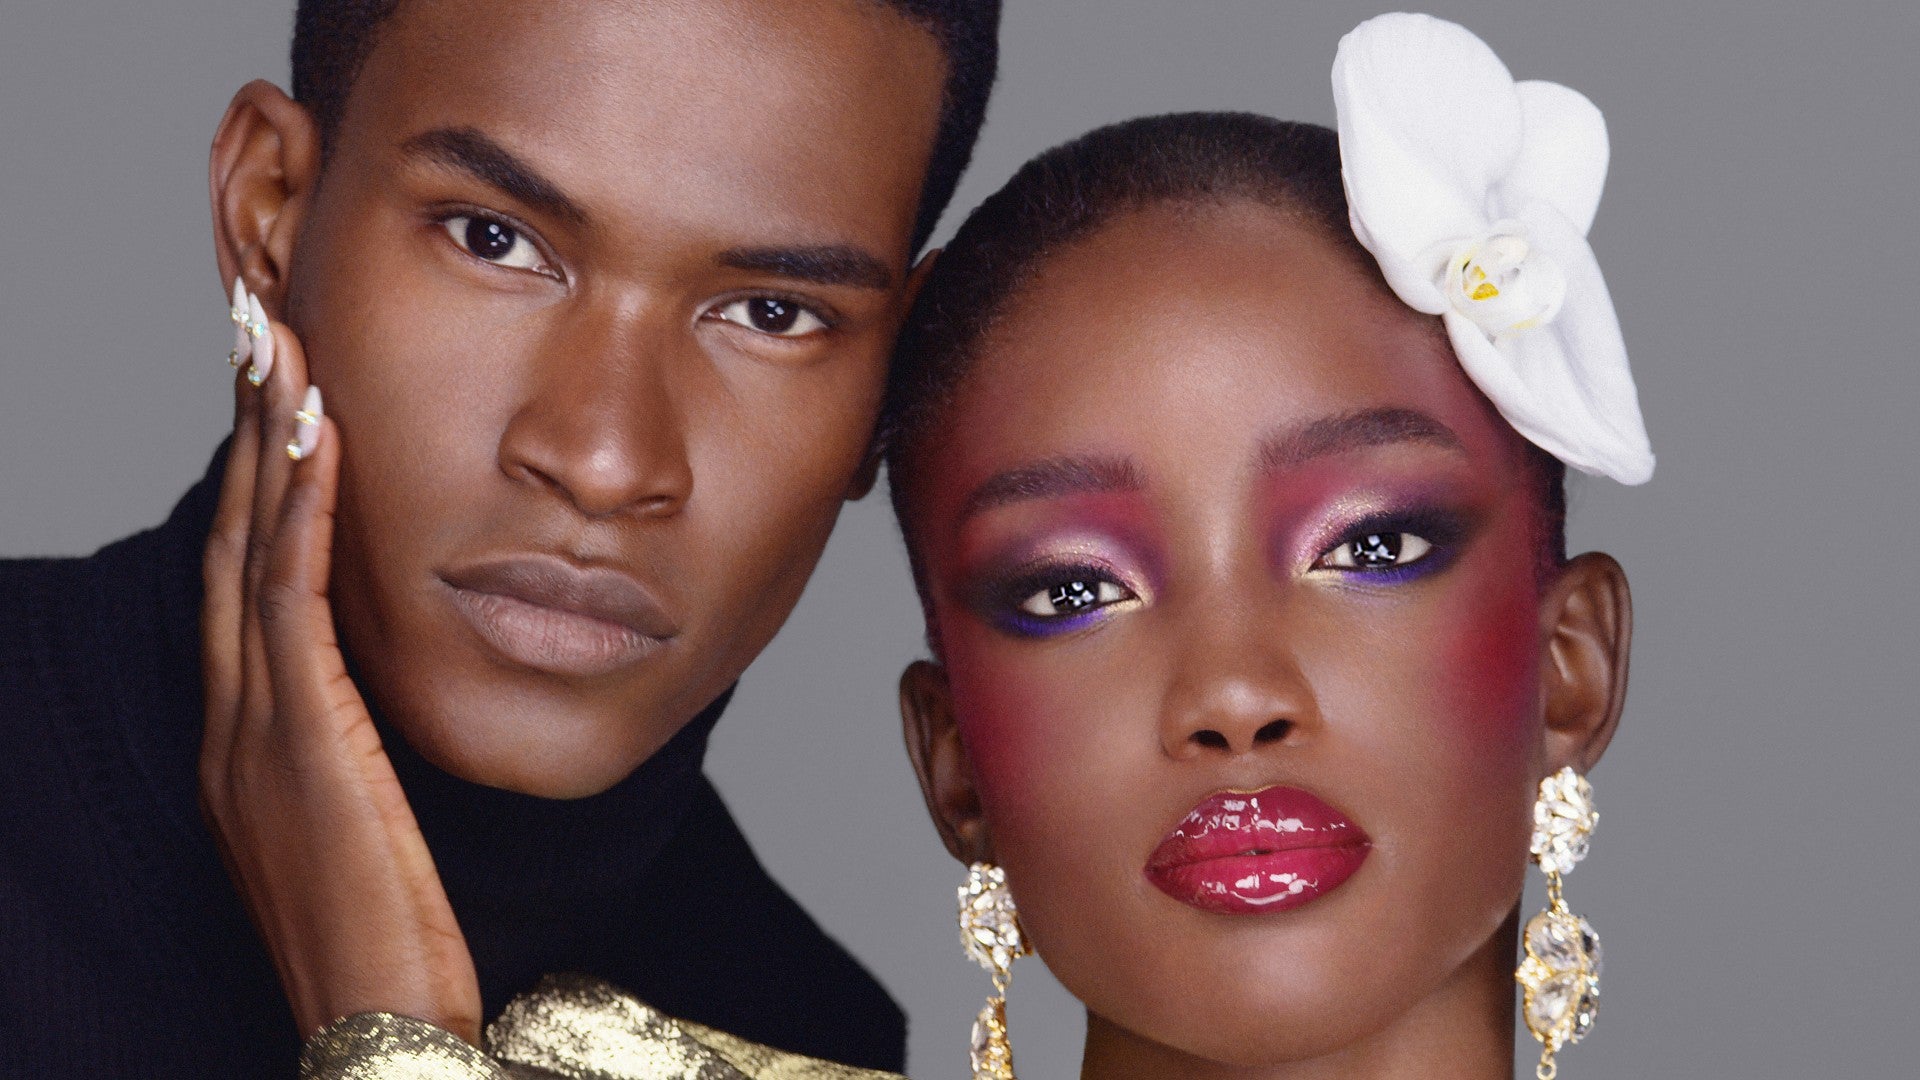 Pat McGrath Taps Two Up-And-Coming Black Models For New Launch And Campaign